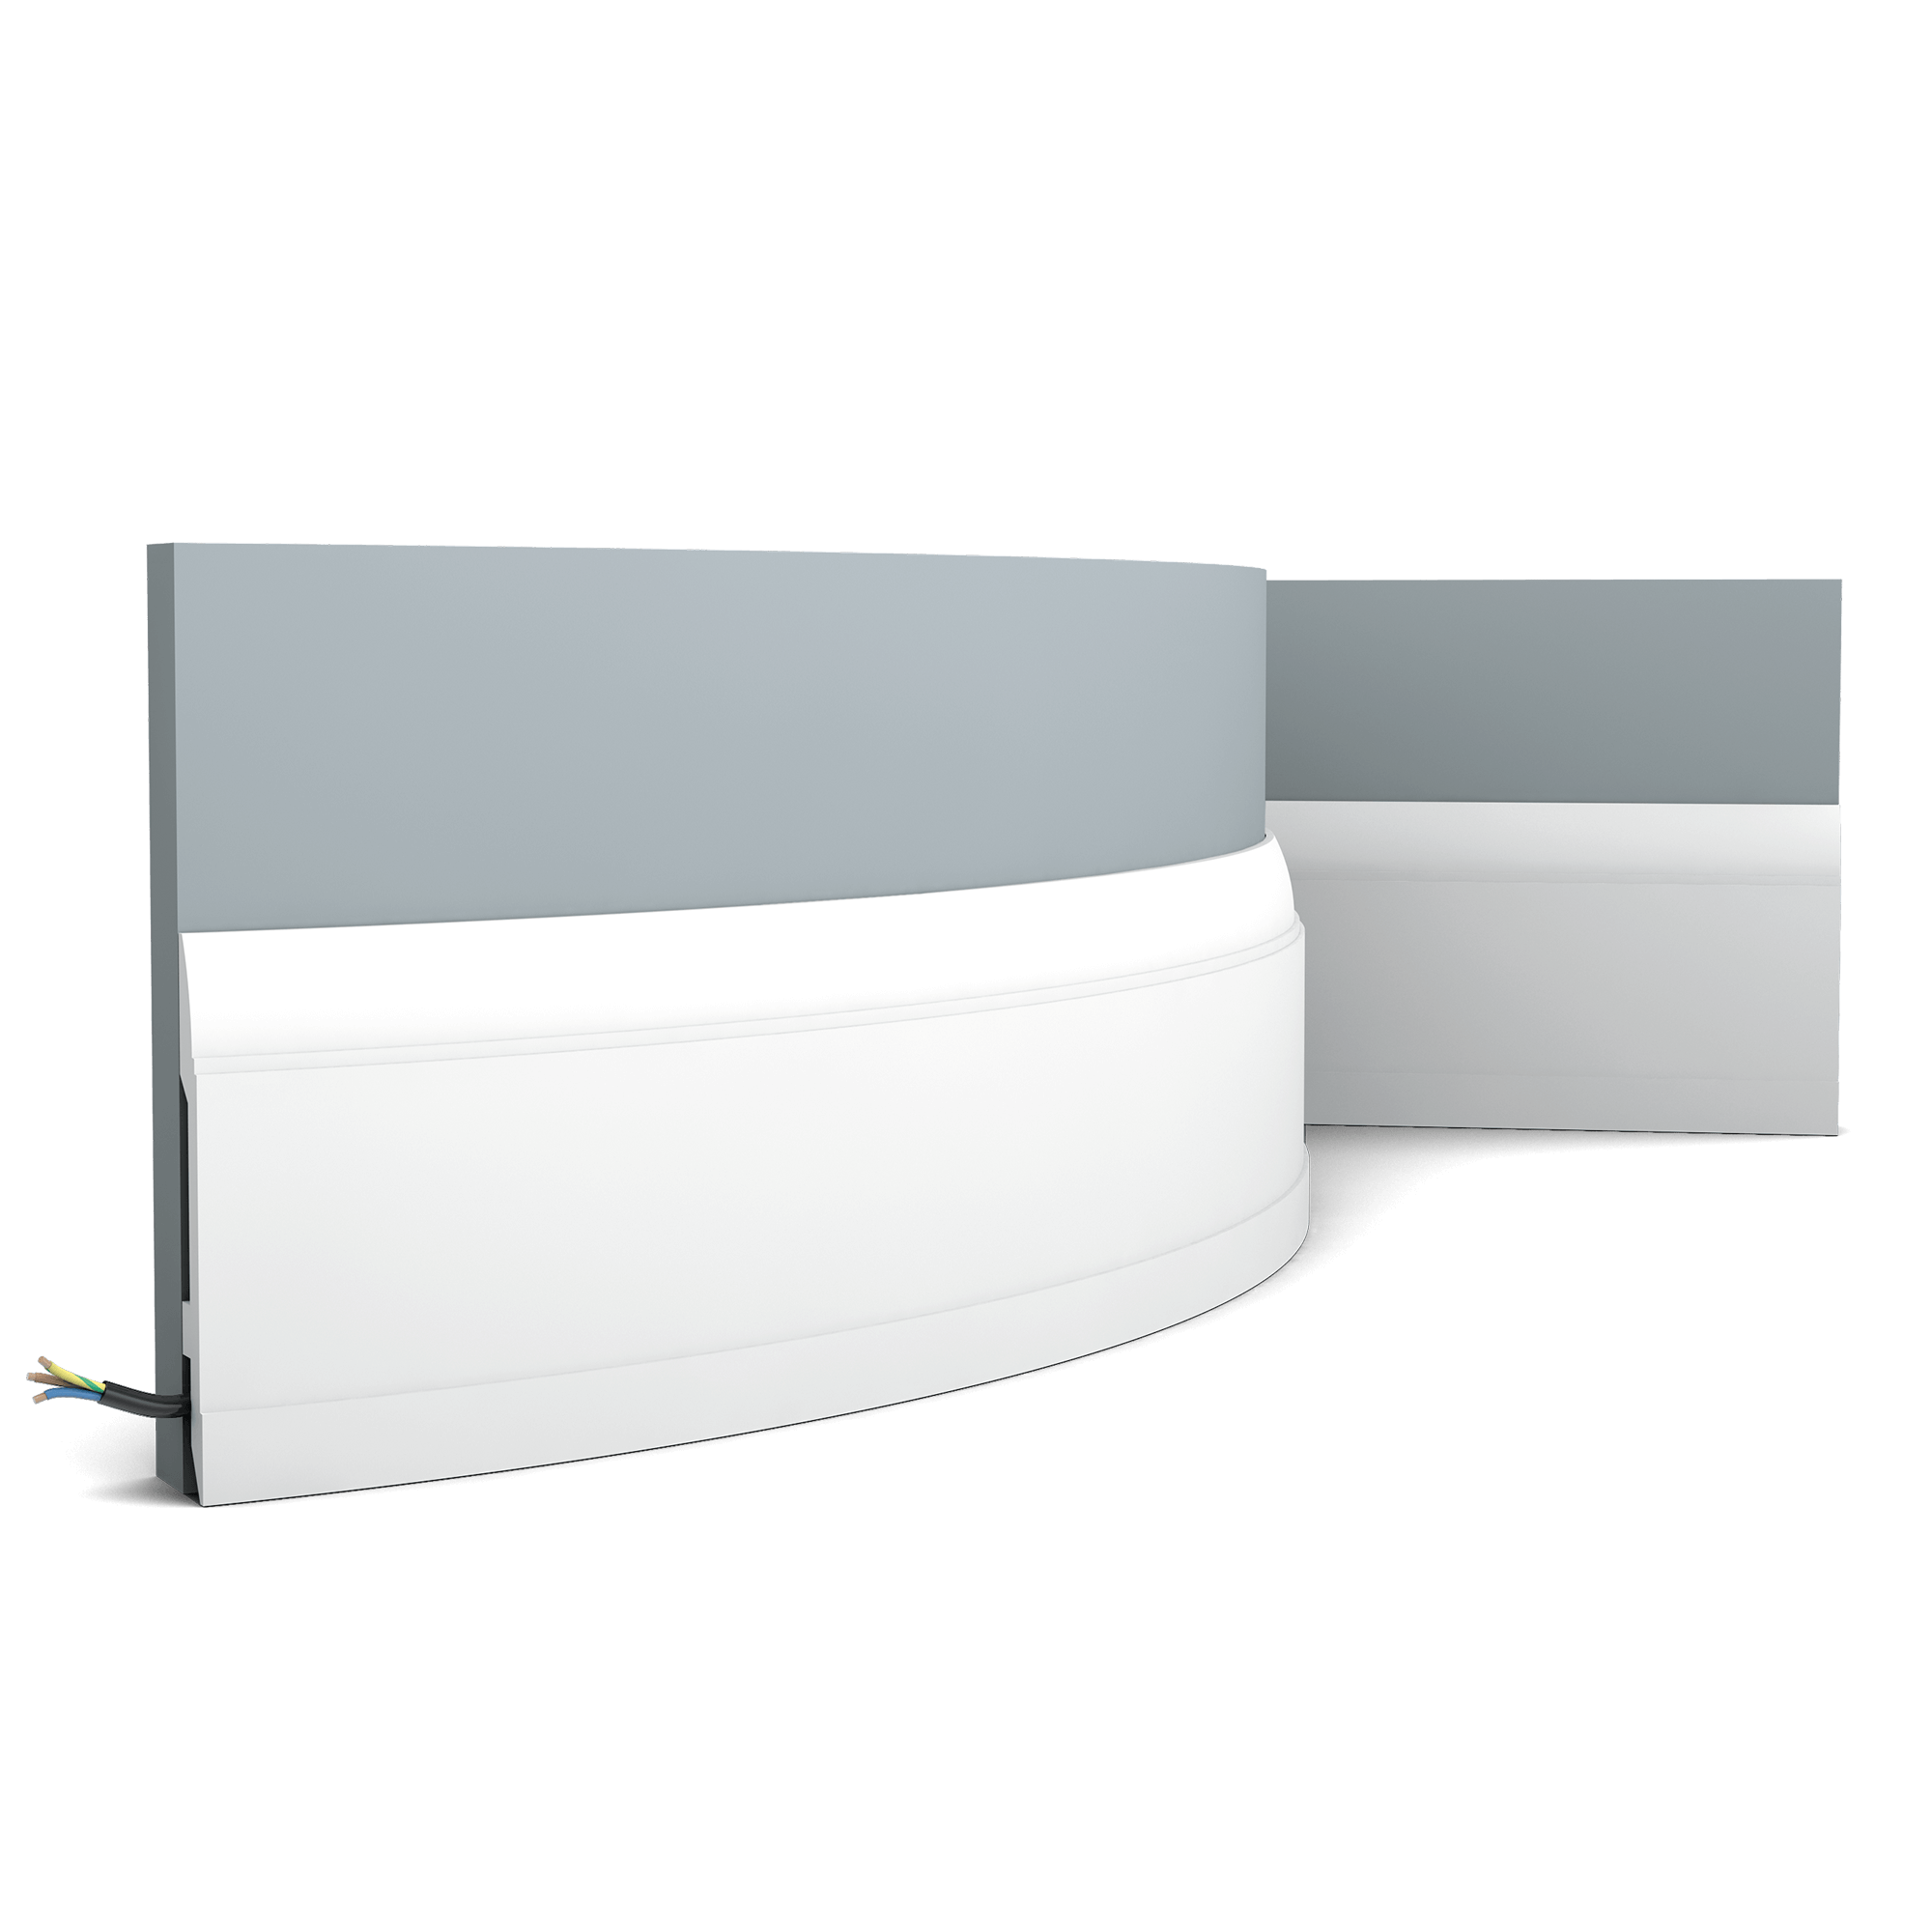 Flexible version of the SX104. Modern skirting board with linear pattern. The restrained design of this skirting board makes it suitable for a variety of decorating styles. Thanks to its Flex technology, curved walls and surfaces are no problem. Installation remark: It is necessary to screw this profile on the wall. Flex Radius: R min = 40 cm